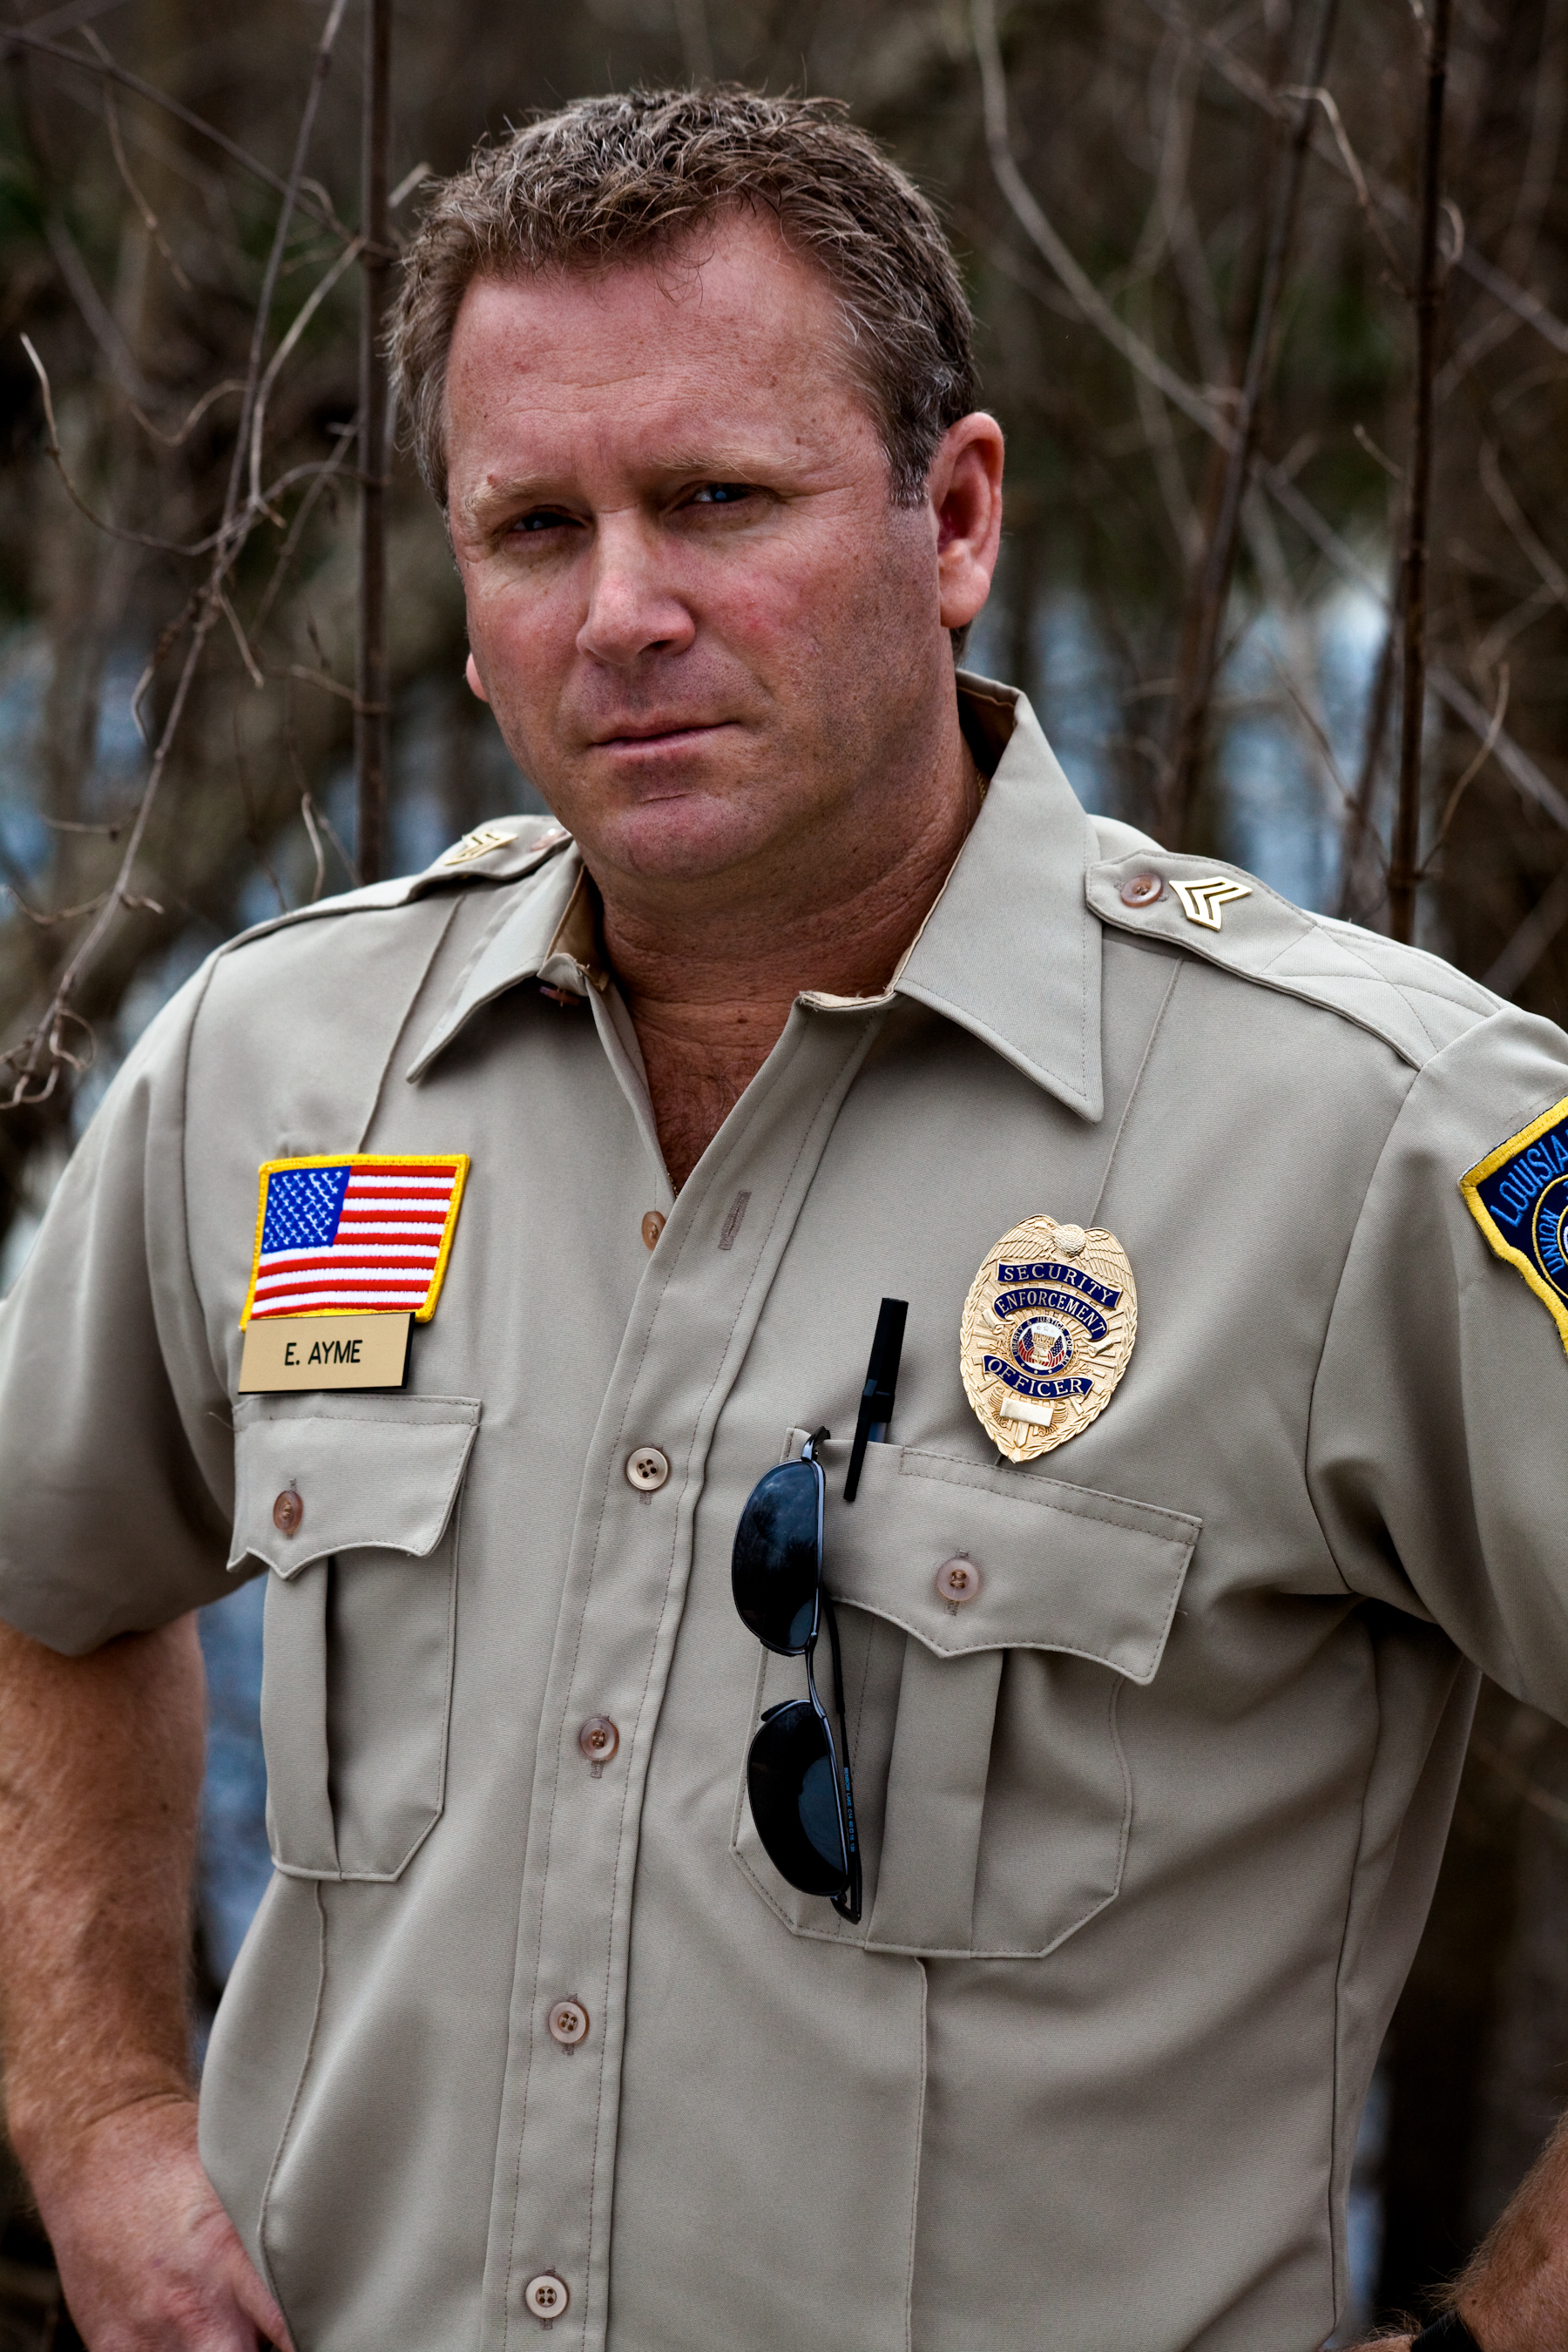 Tony Senzamici as State Trooper Ayme on the set of Xtinction.